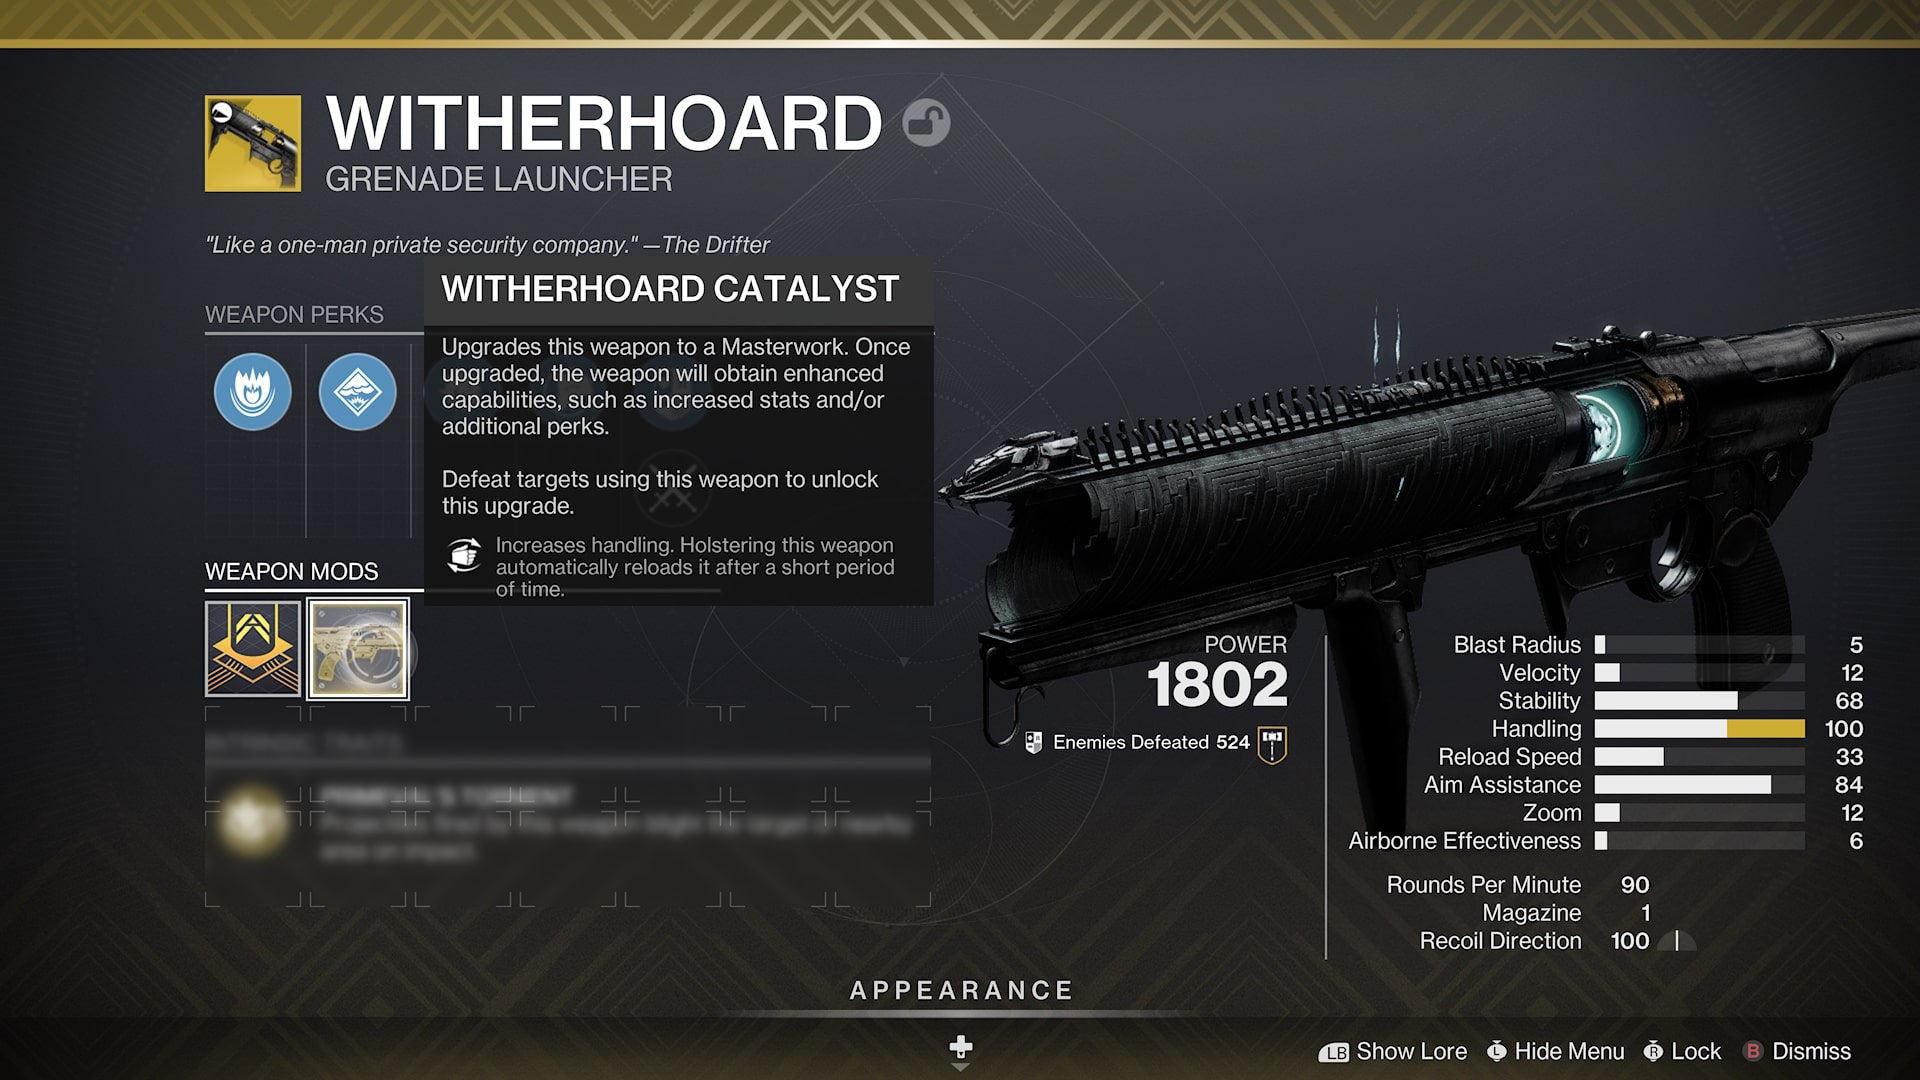 How to get Witherhoard Catalyst